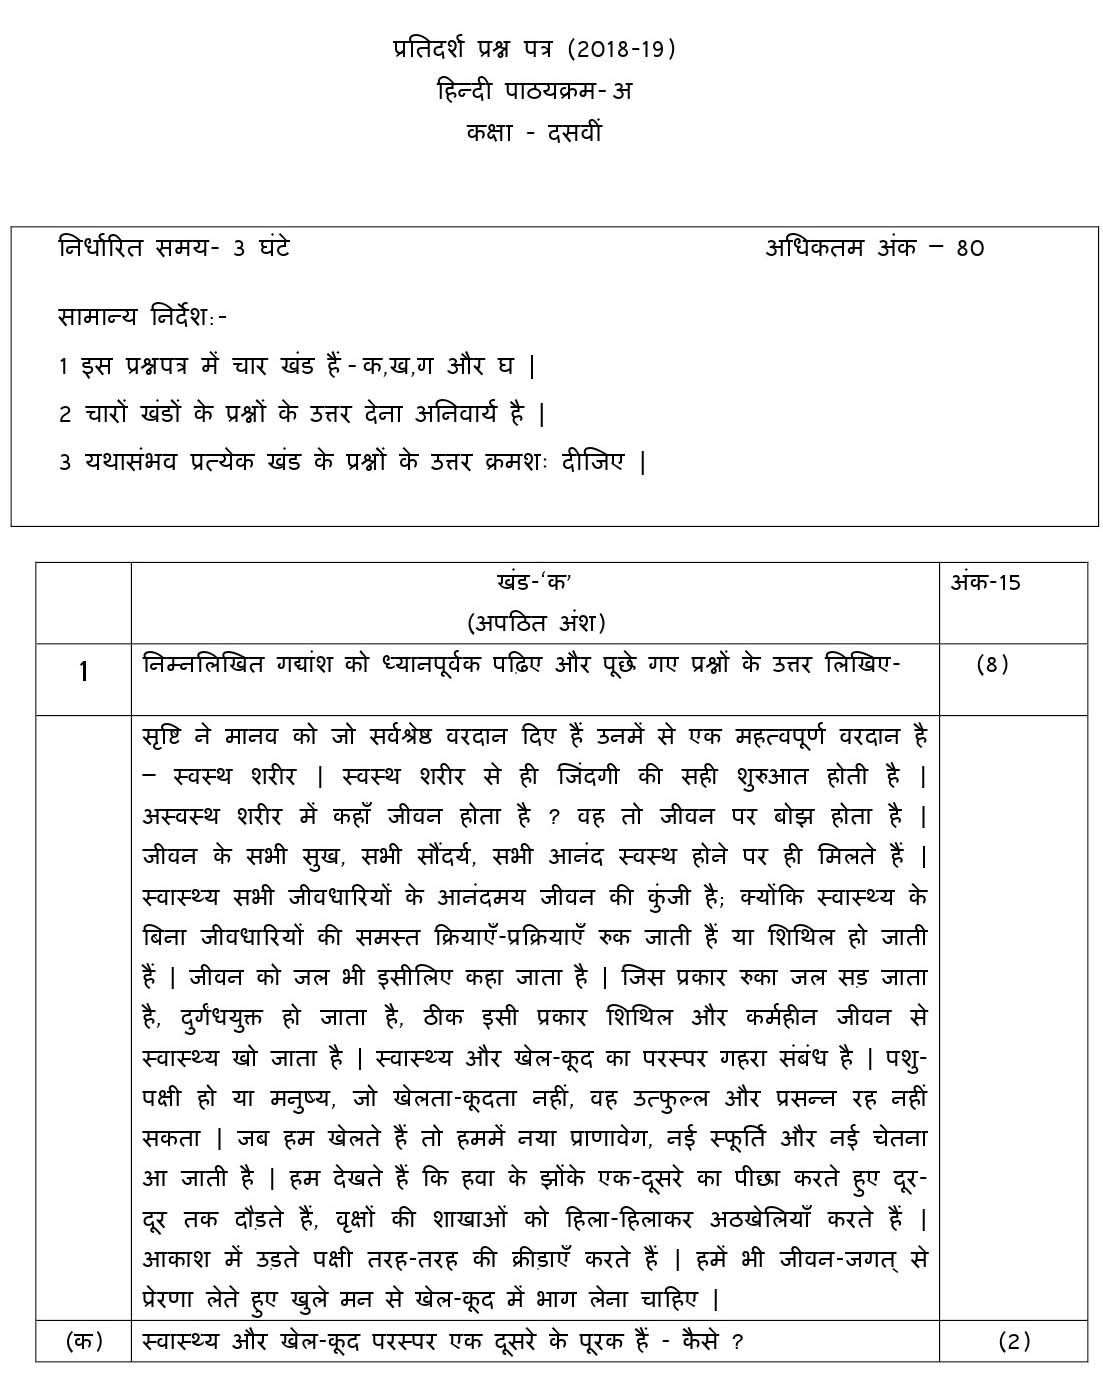 Hindi A CBSE Class X Sample Question Paper 2018-19 - Image 1